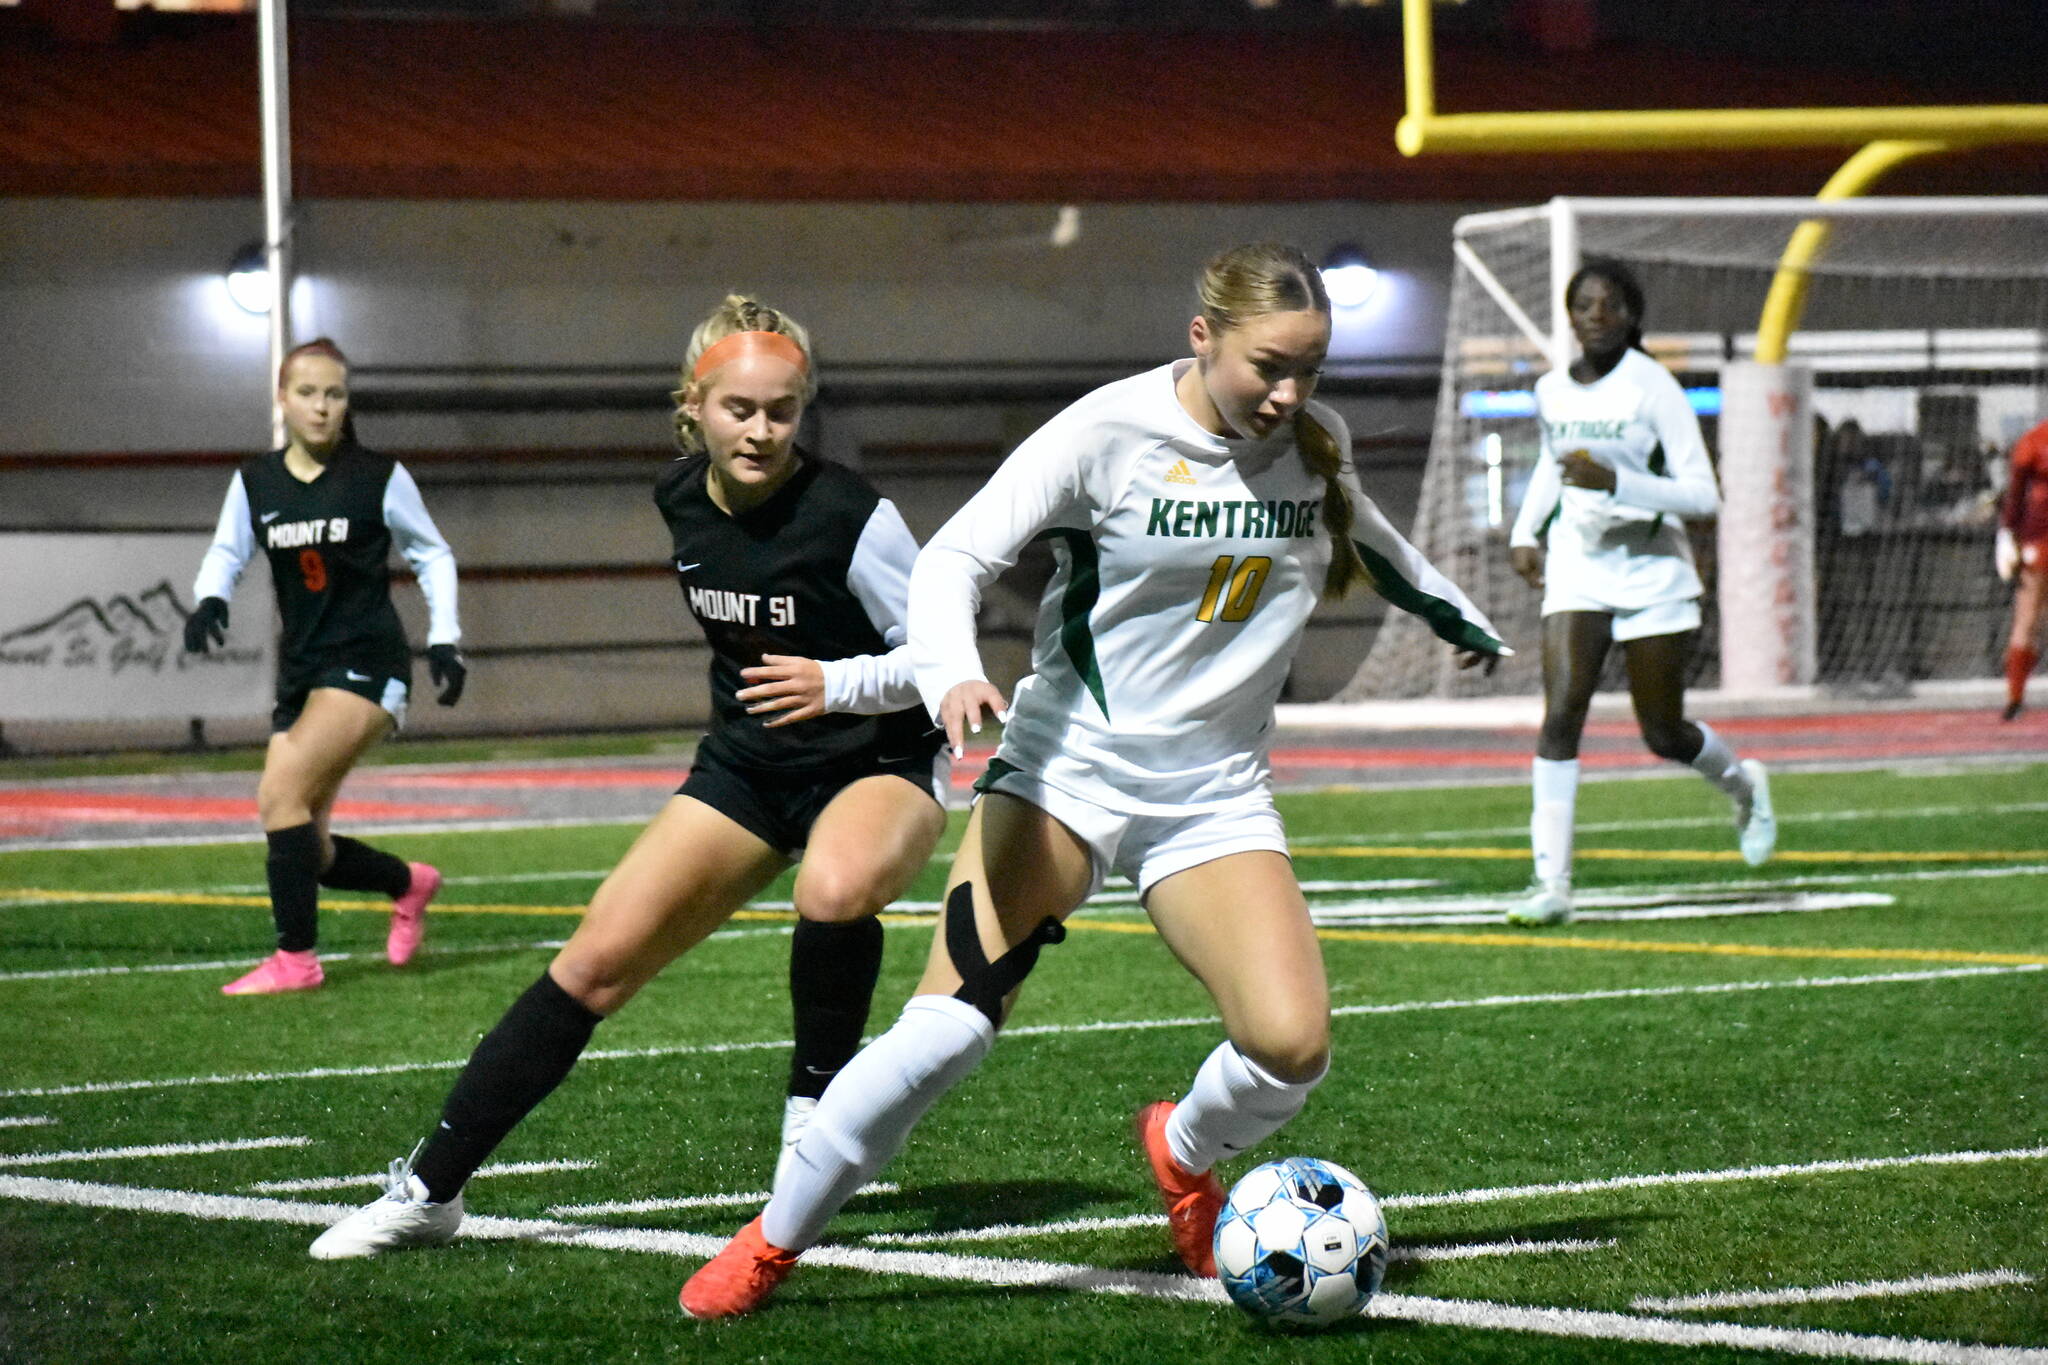 Kentridge's Haley Swanson named to the second team NPSL. Ben Ray / The Reporter